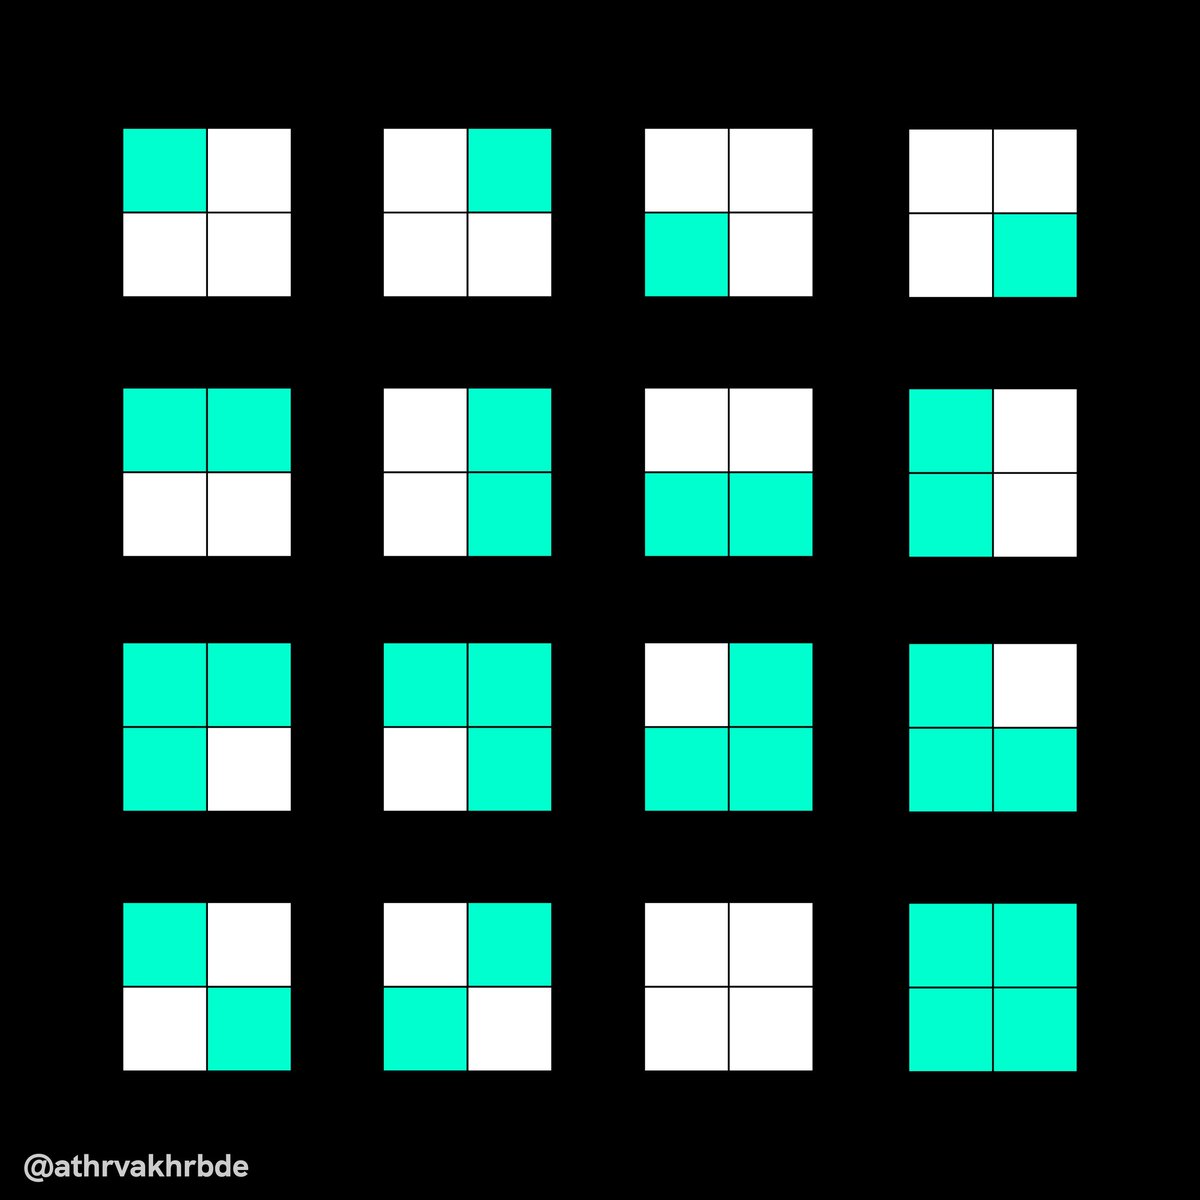 9/ Now we'll apply the same logic to pixels. Let's take 4 pixels and 2 colors. The permutations are shown in image below